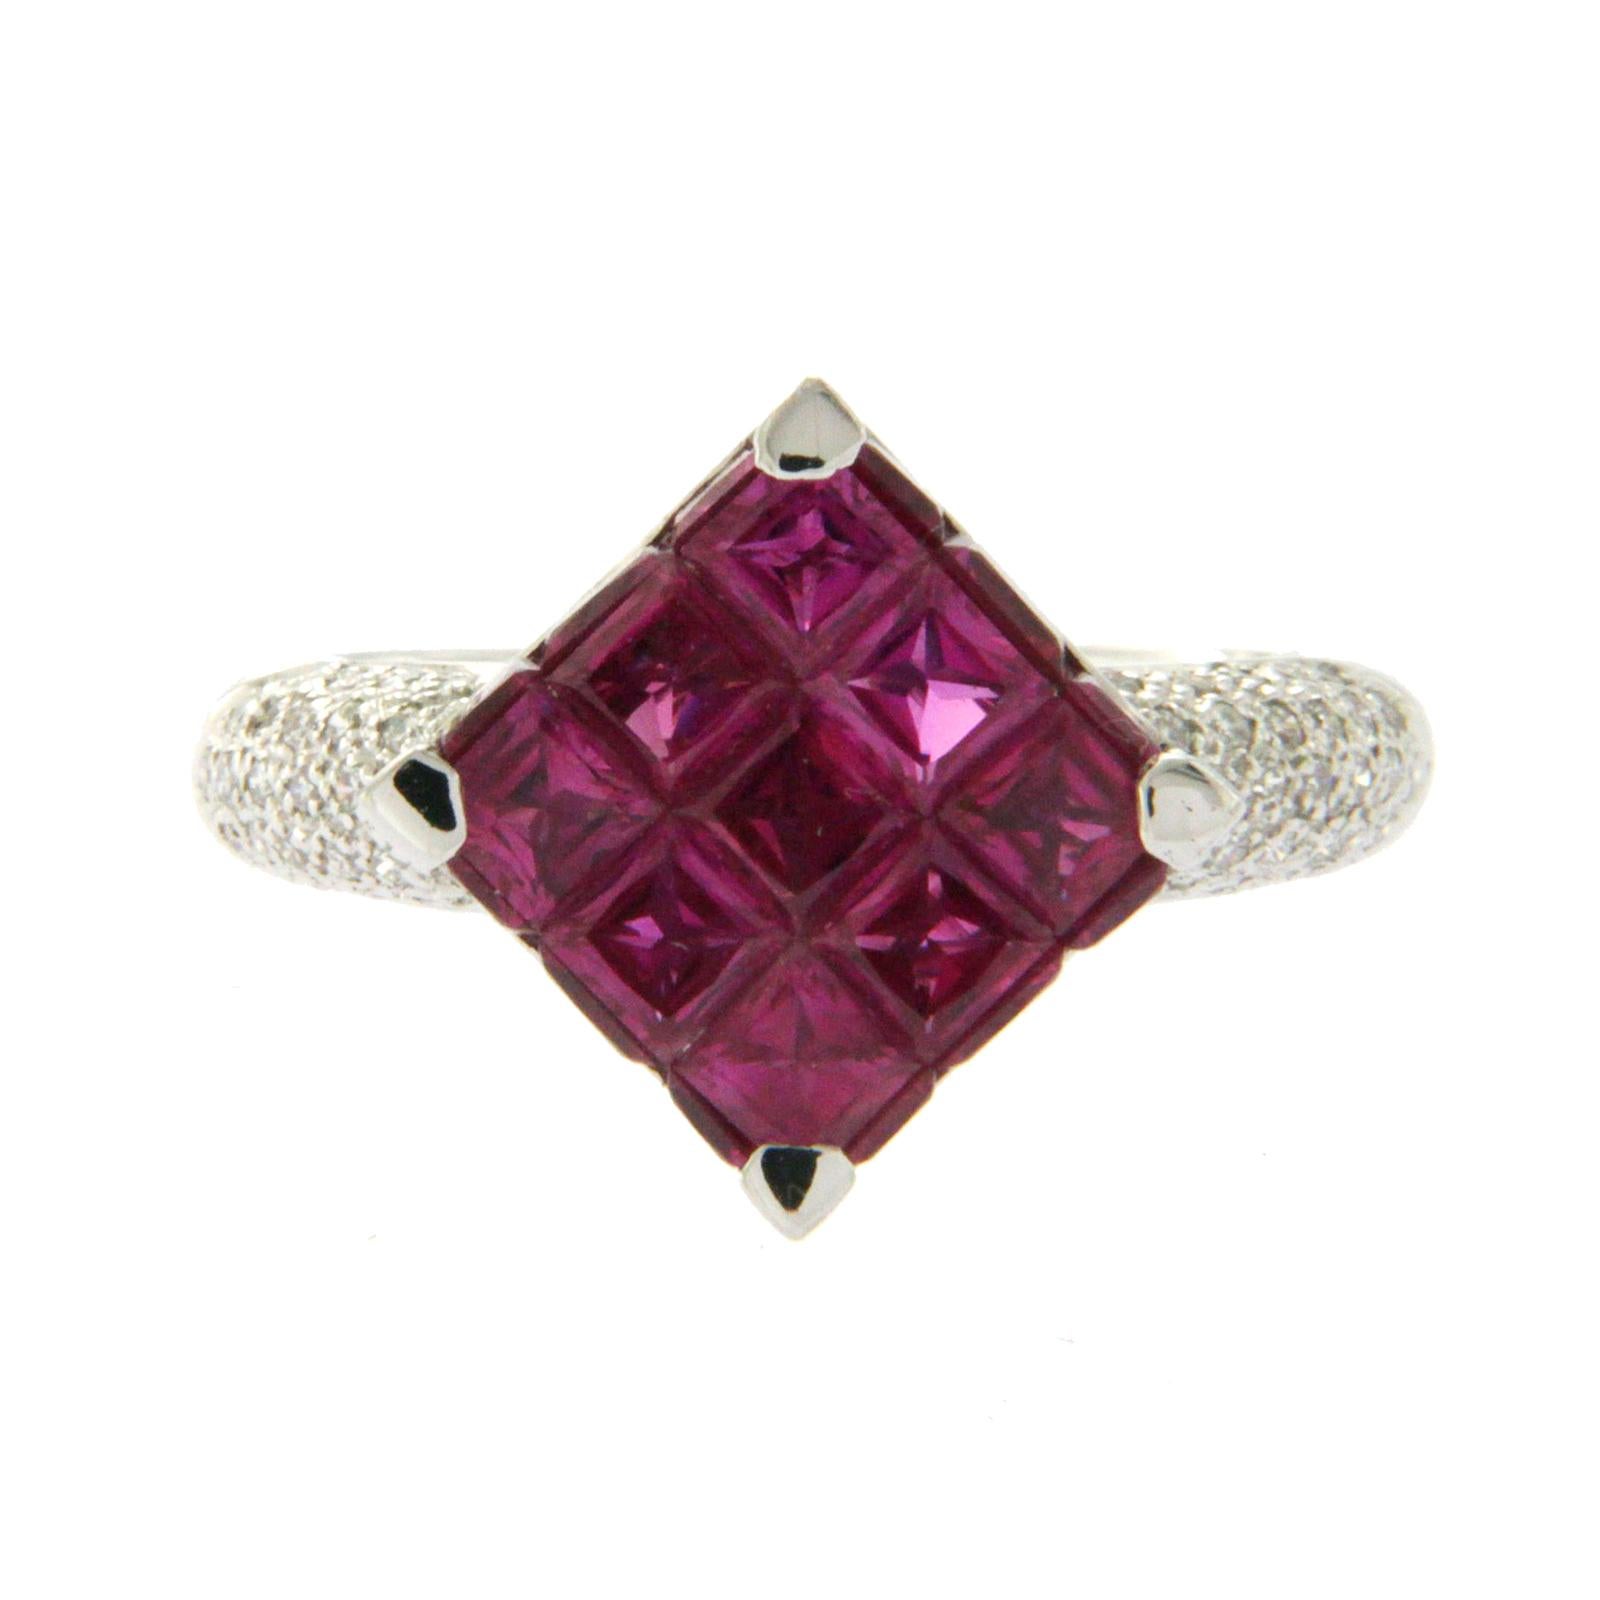 Top: 14.5 mm
Band Width: 3 mm
Metal: 18K White Gold
Size: 6
Hallmarks: 18K
Total Weight: 7 Grams
Stone Type: 0.45 Ct Diamonds VS2 G-F & 5.05 CT Natural Ruby
Condition: New
Stock Number: R1056
Estimated Retail Price: $7833

Please Message Us for